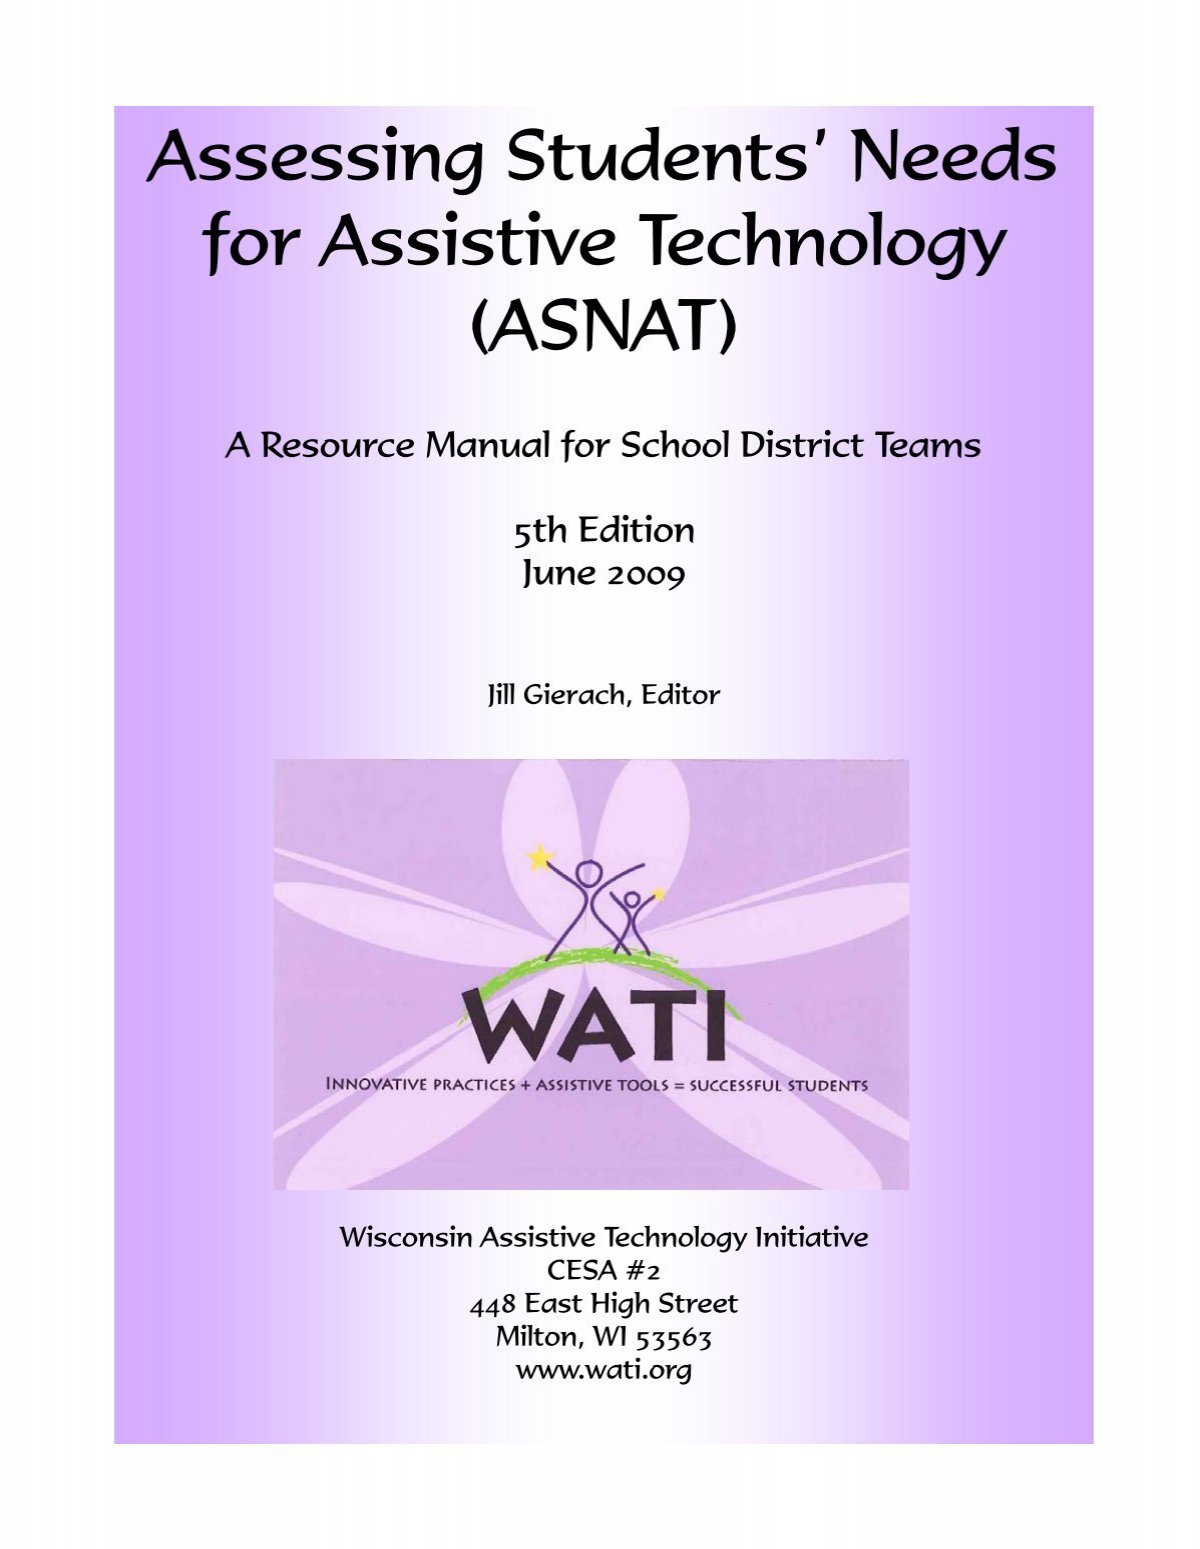 ASNAT Manual - 5th Edition - Wisconsin Assistive Technology